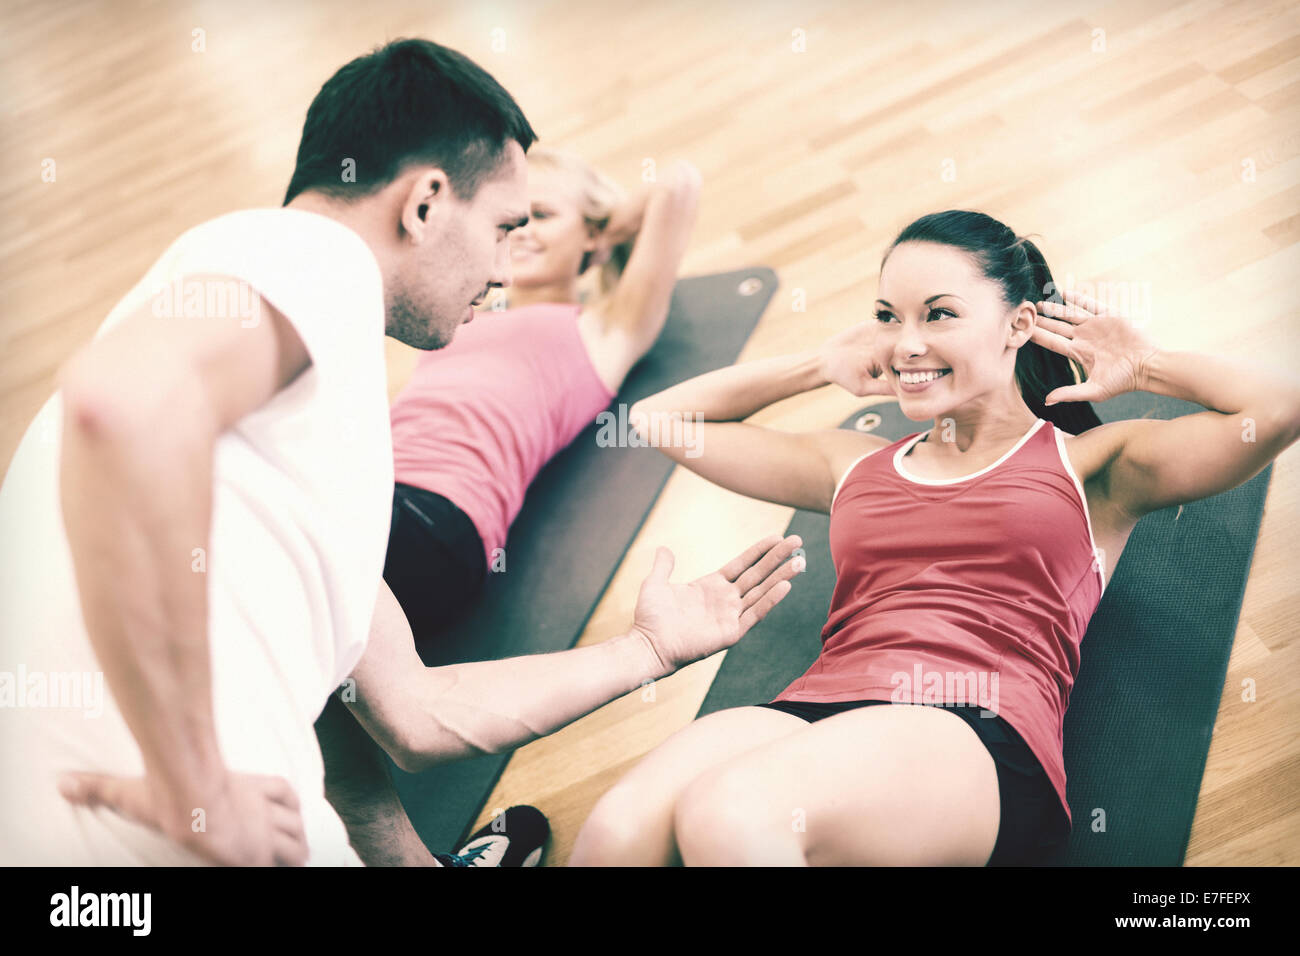 group of smiling women doing sit ups in the gym Stock Photo